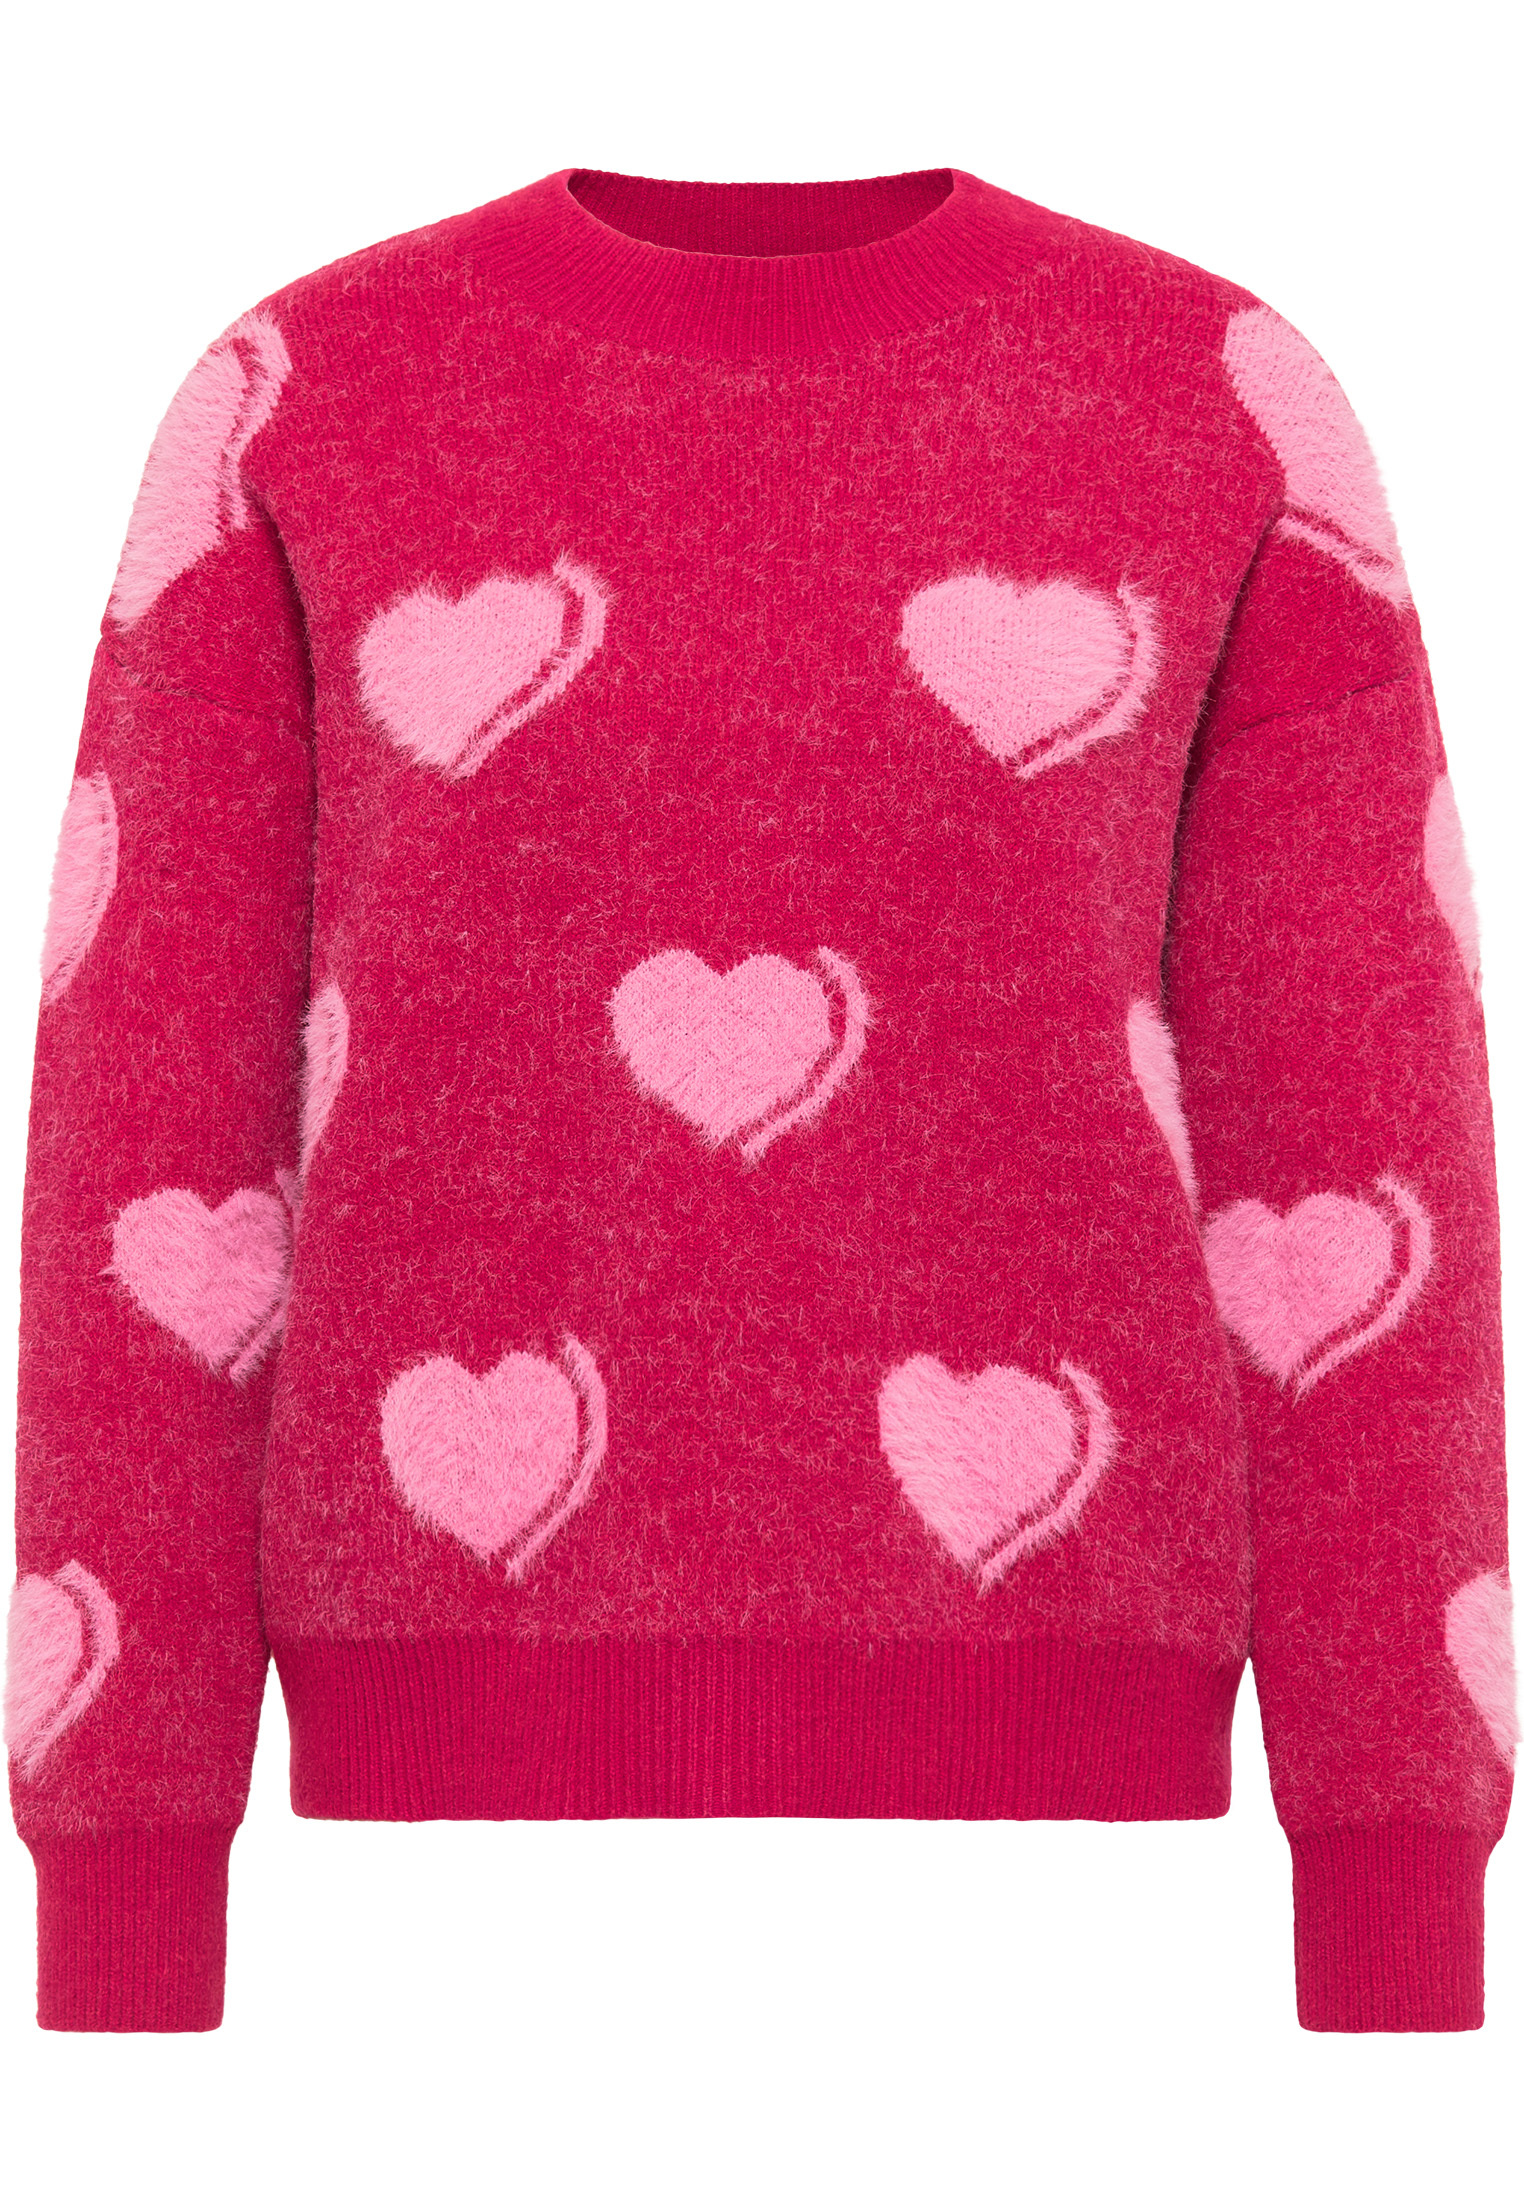 Donna R7vAB MYMO Pullover in Rosa, Rosa 